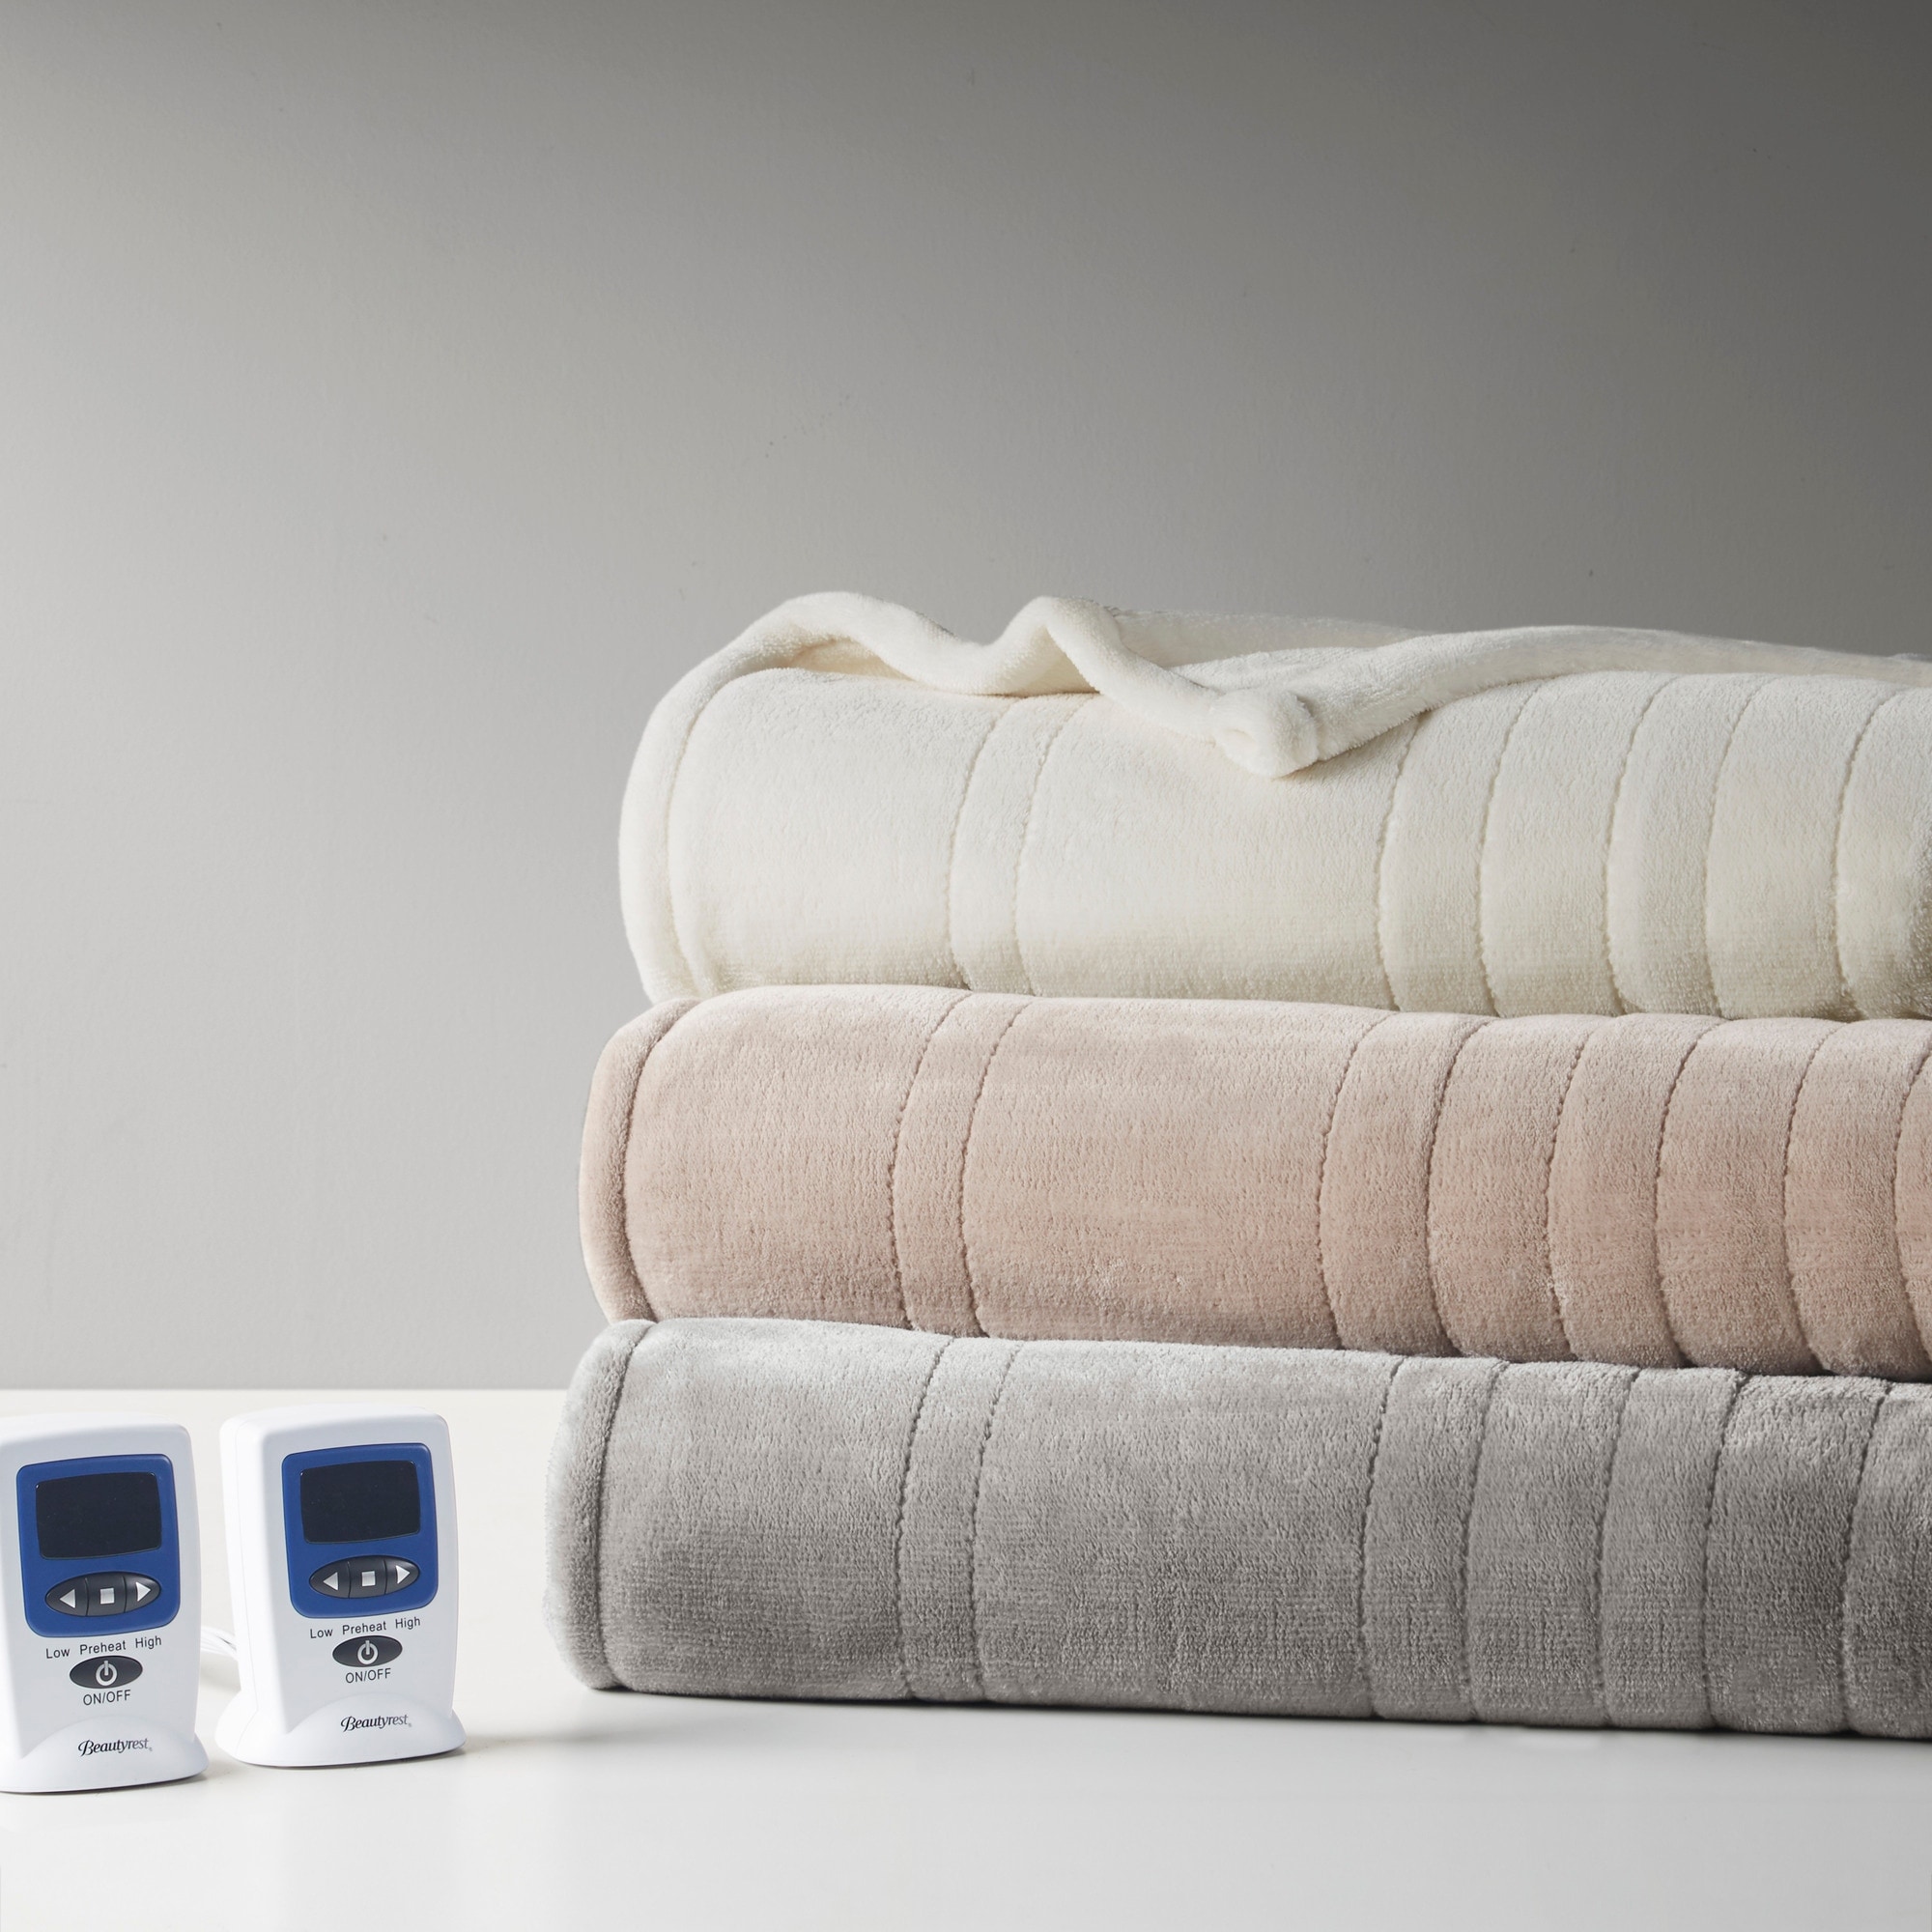 Beautyrest Elect Electric Blanket with Two 20 Heat Level Setting